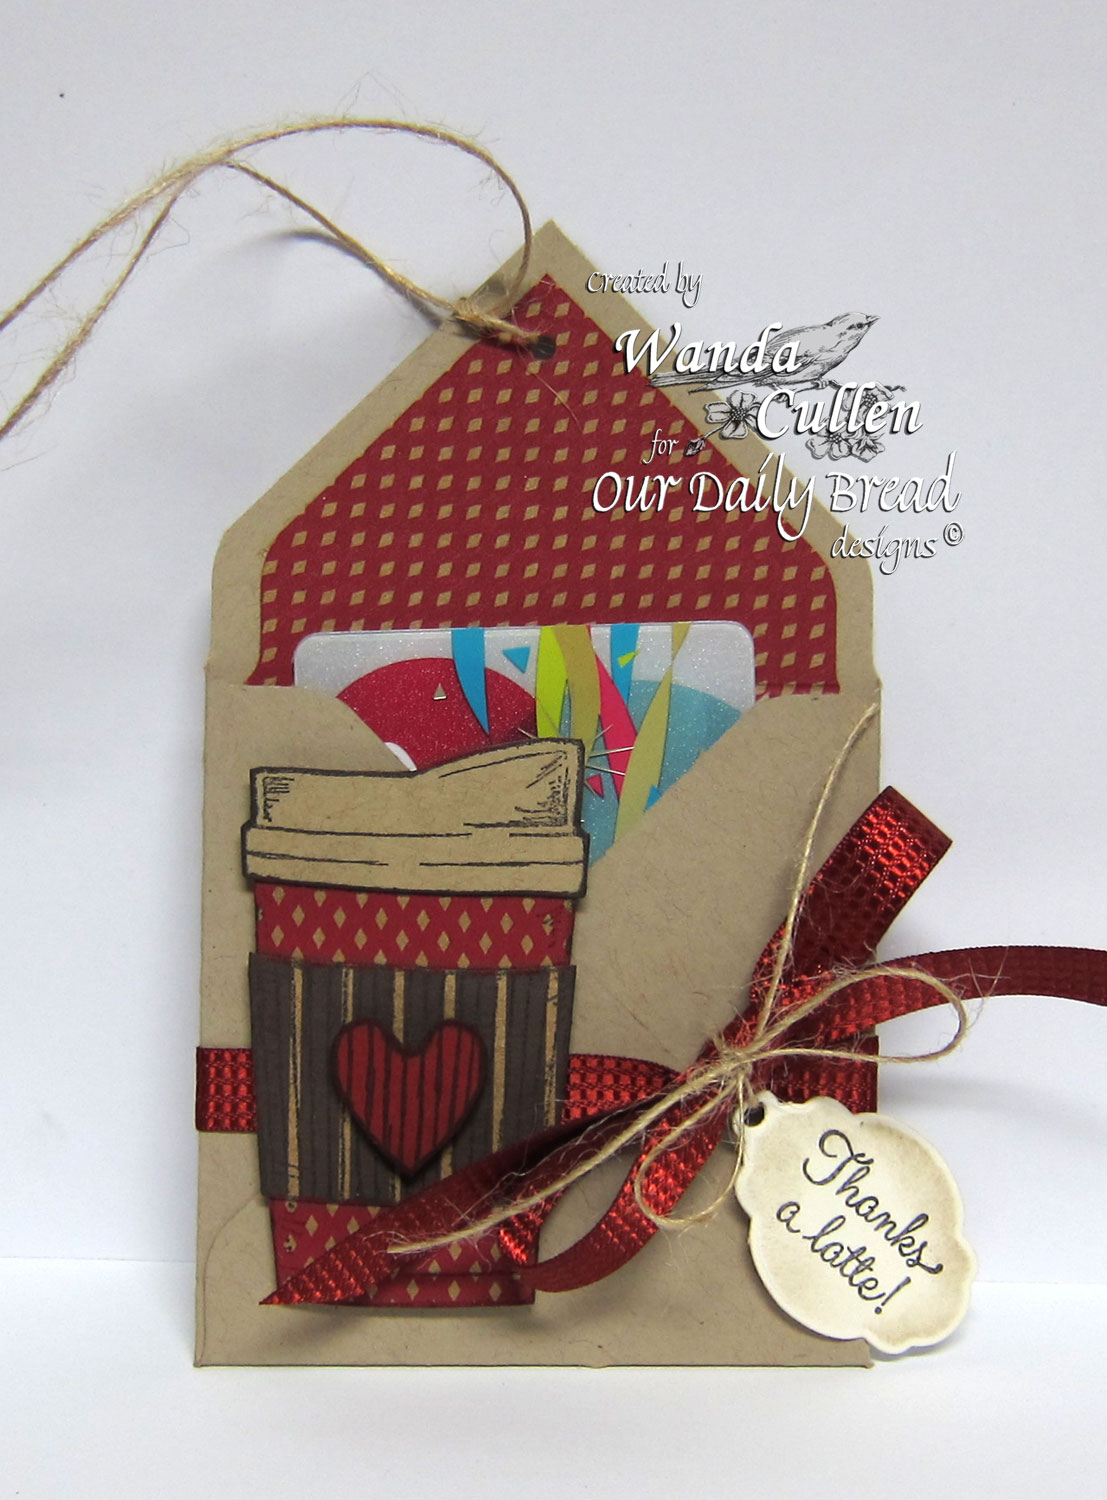 Stamps - North Coast Creations Warm My Heart, Our Daily Bread Designs Custom Mini Tags Dies